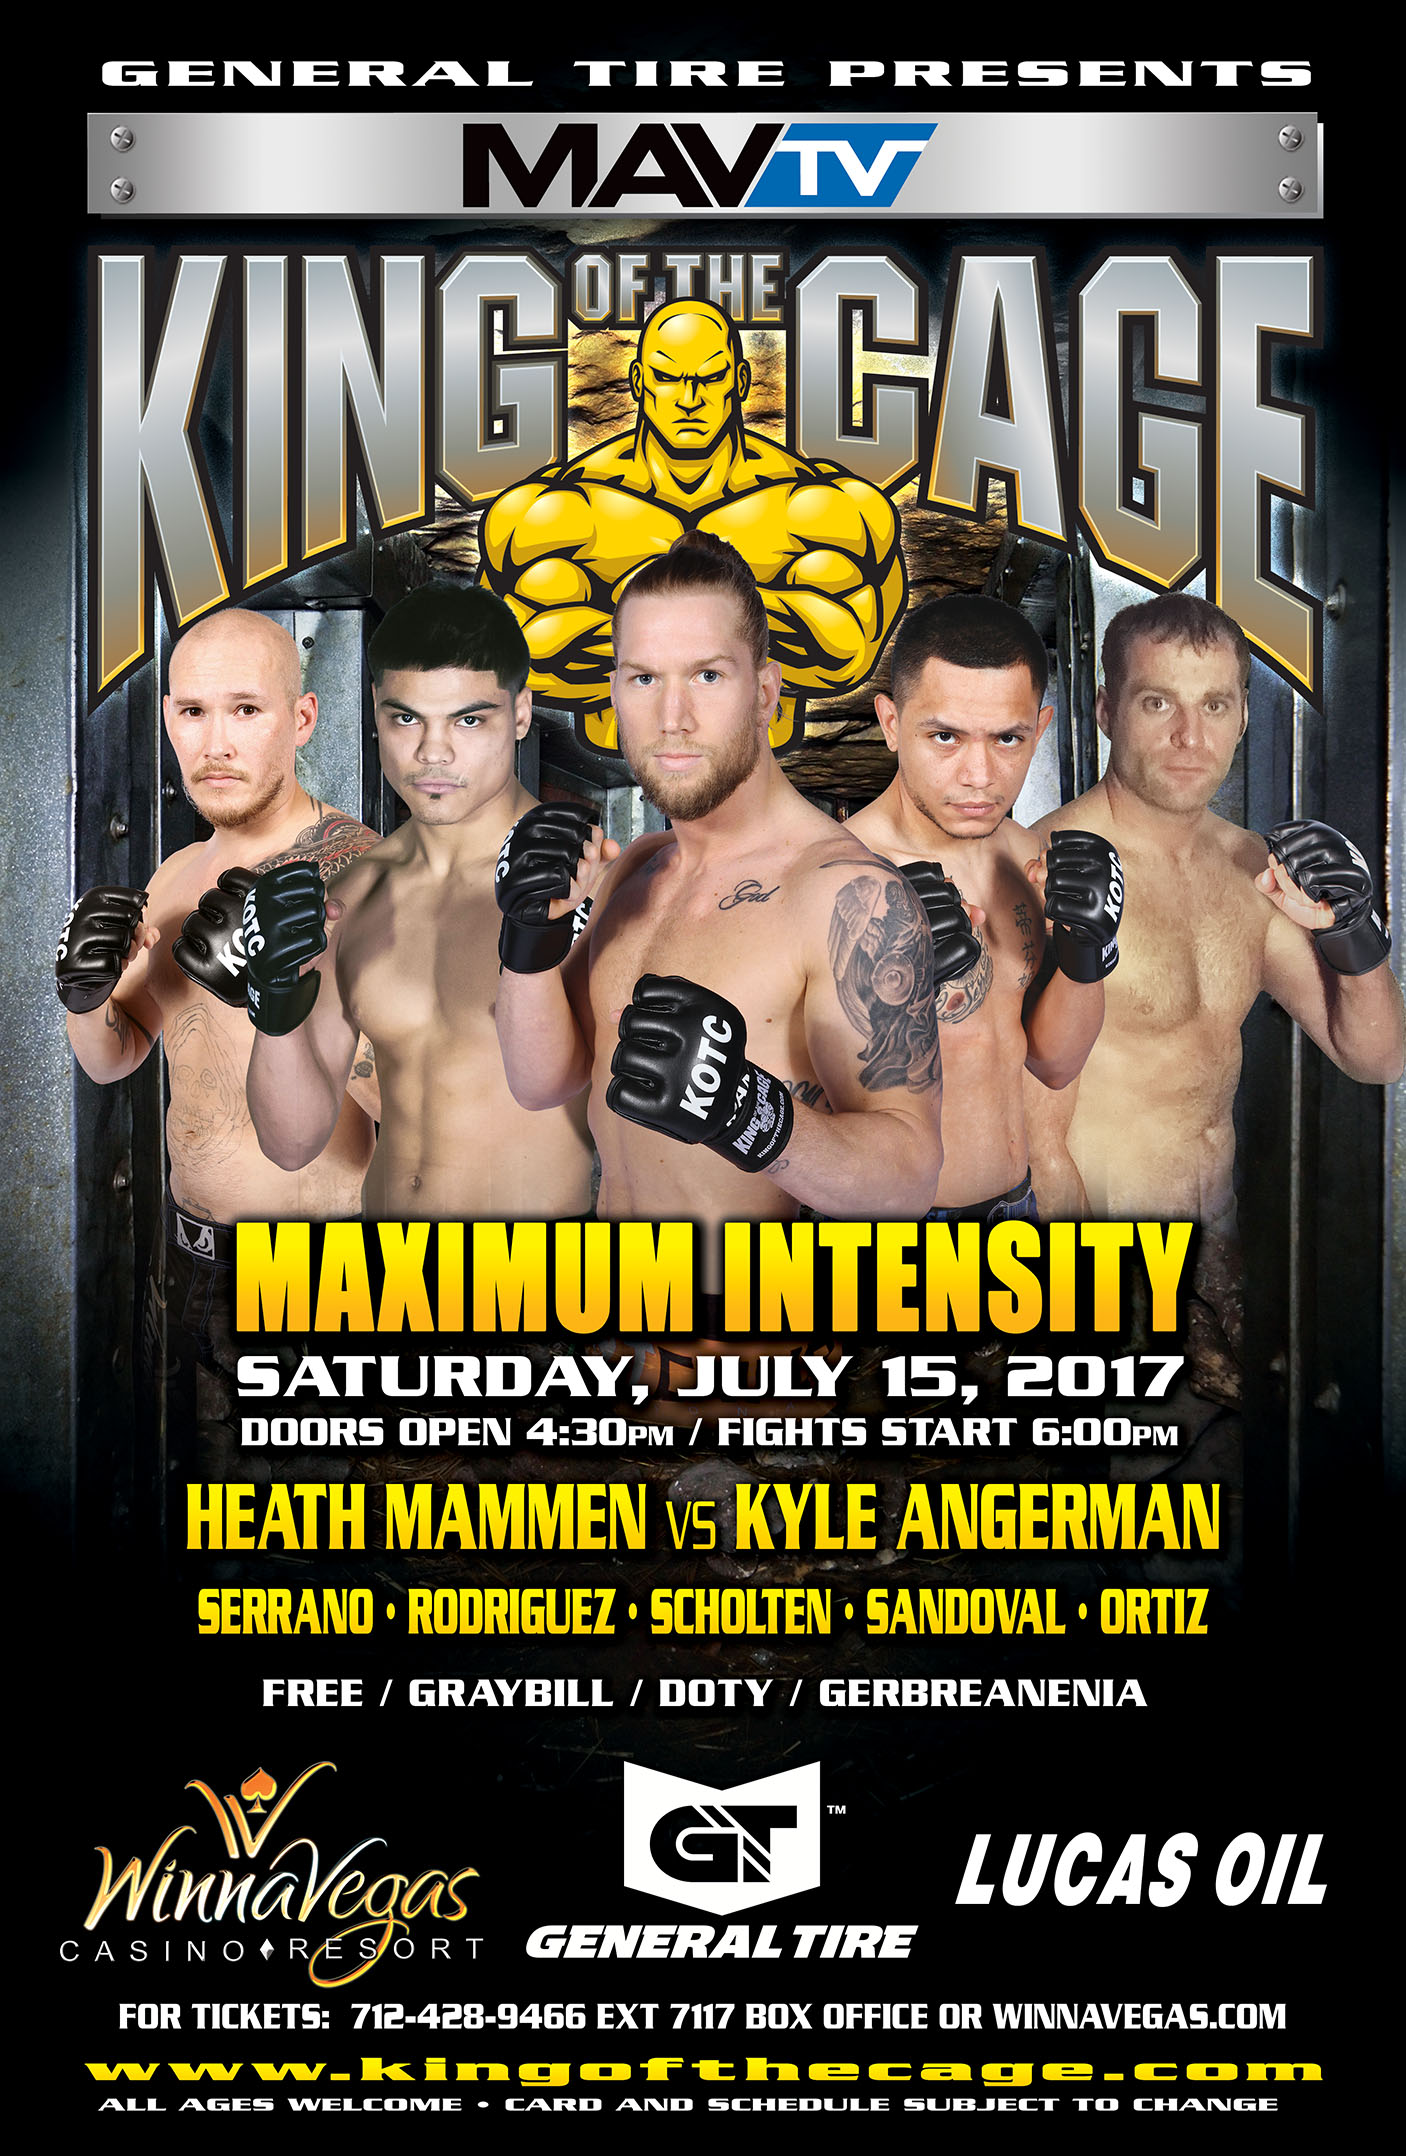 King of the Cage Returns to WinnaVegas Casino Resort on July 15 for “MAXIMUM INTENSITY”